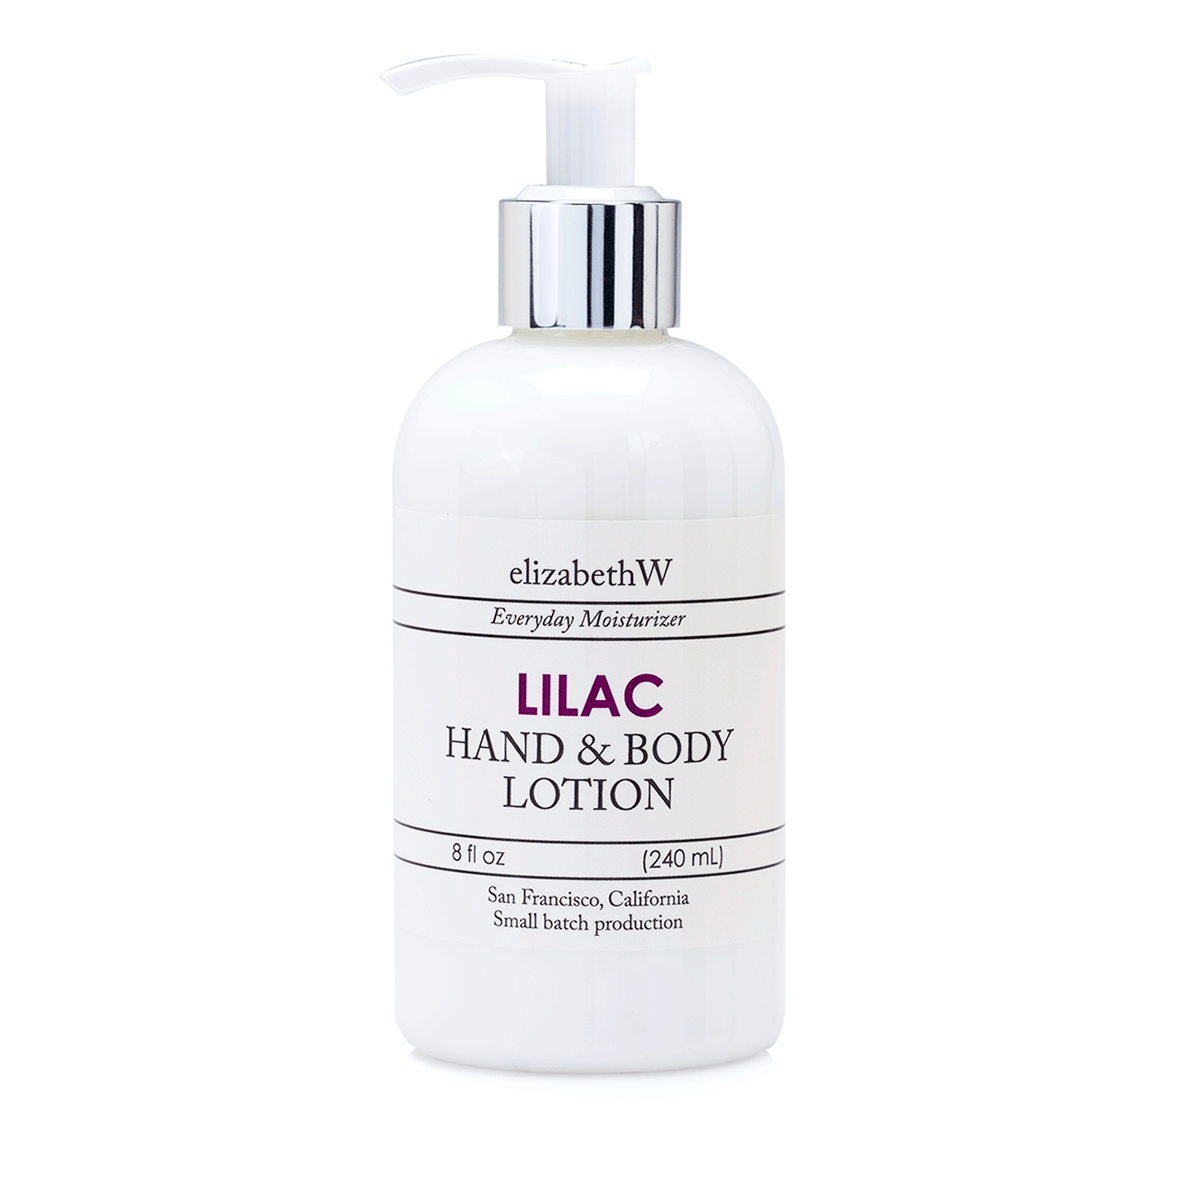 A bottle of elizabeth W Small Batch Apothecary Lilac Hand & Body Lotion, labeled "everyday moisturizer lilac," featuring a pump dispenser. The 8 fl oz bottle notes it's made with shea butter.